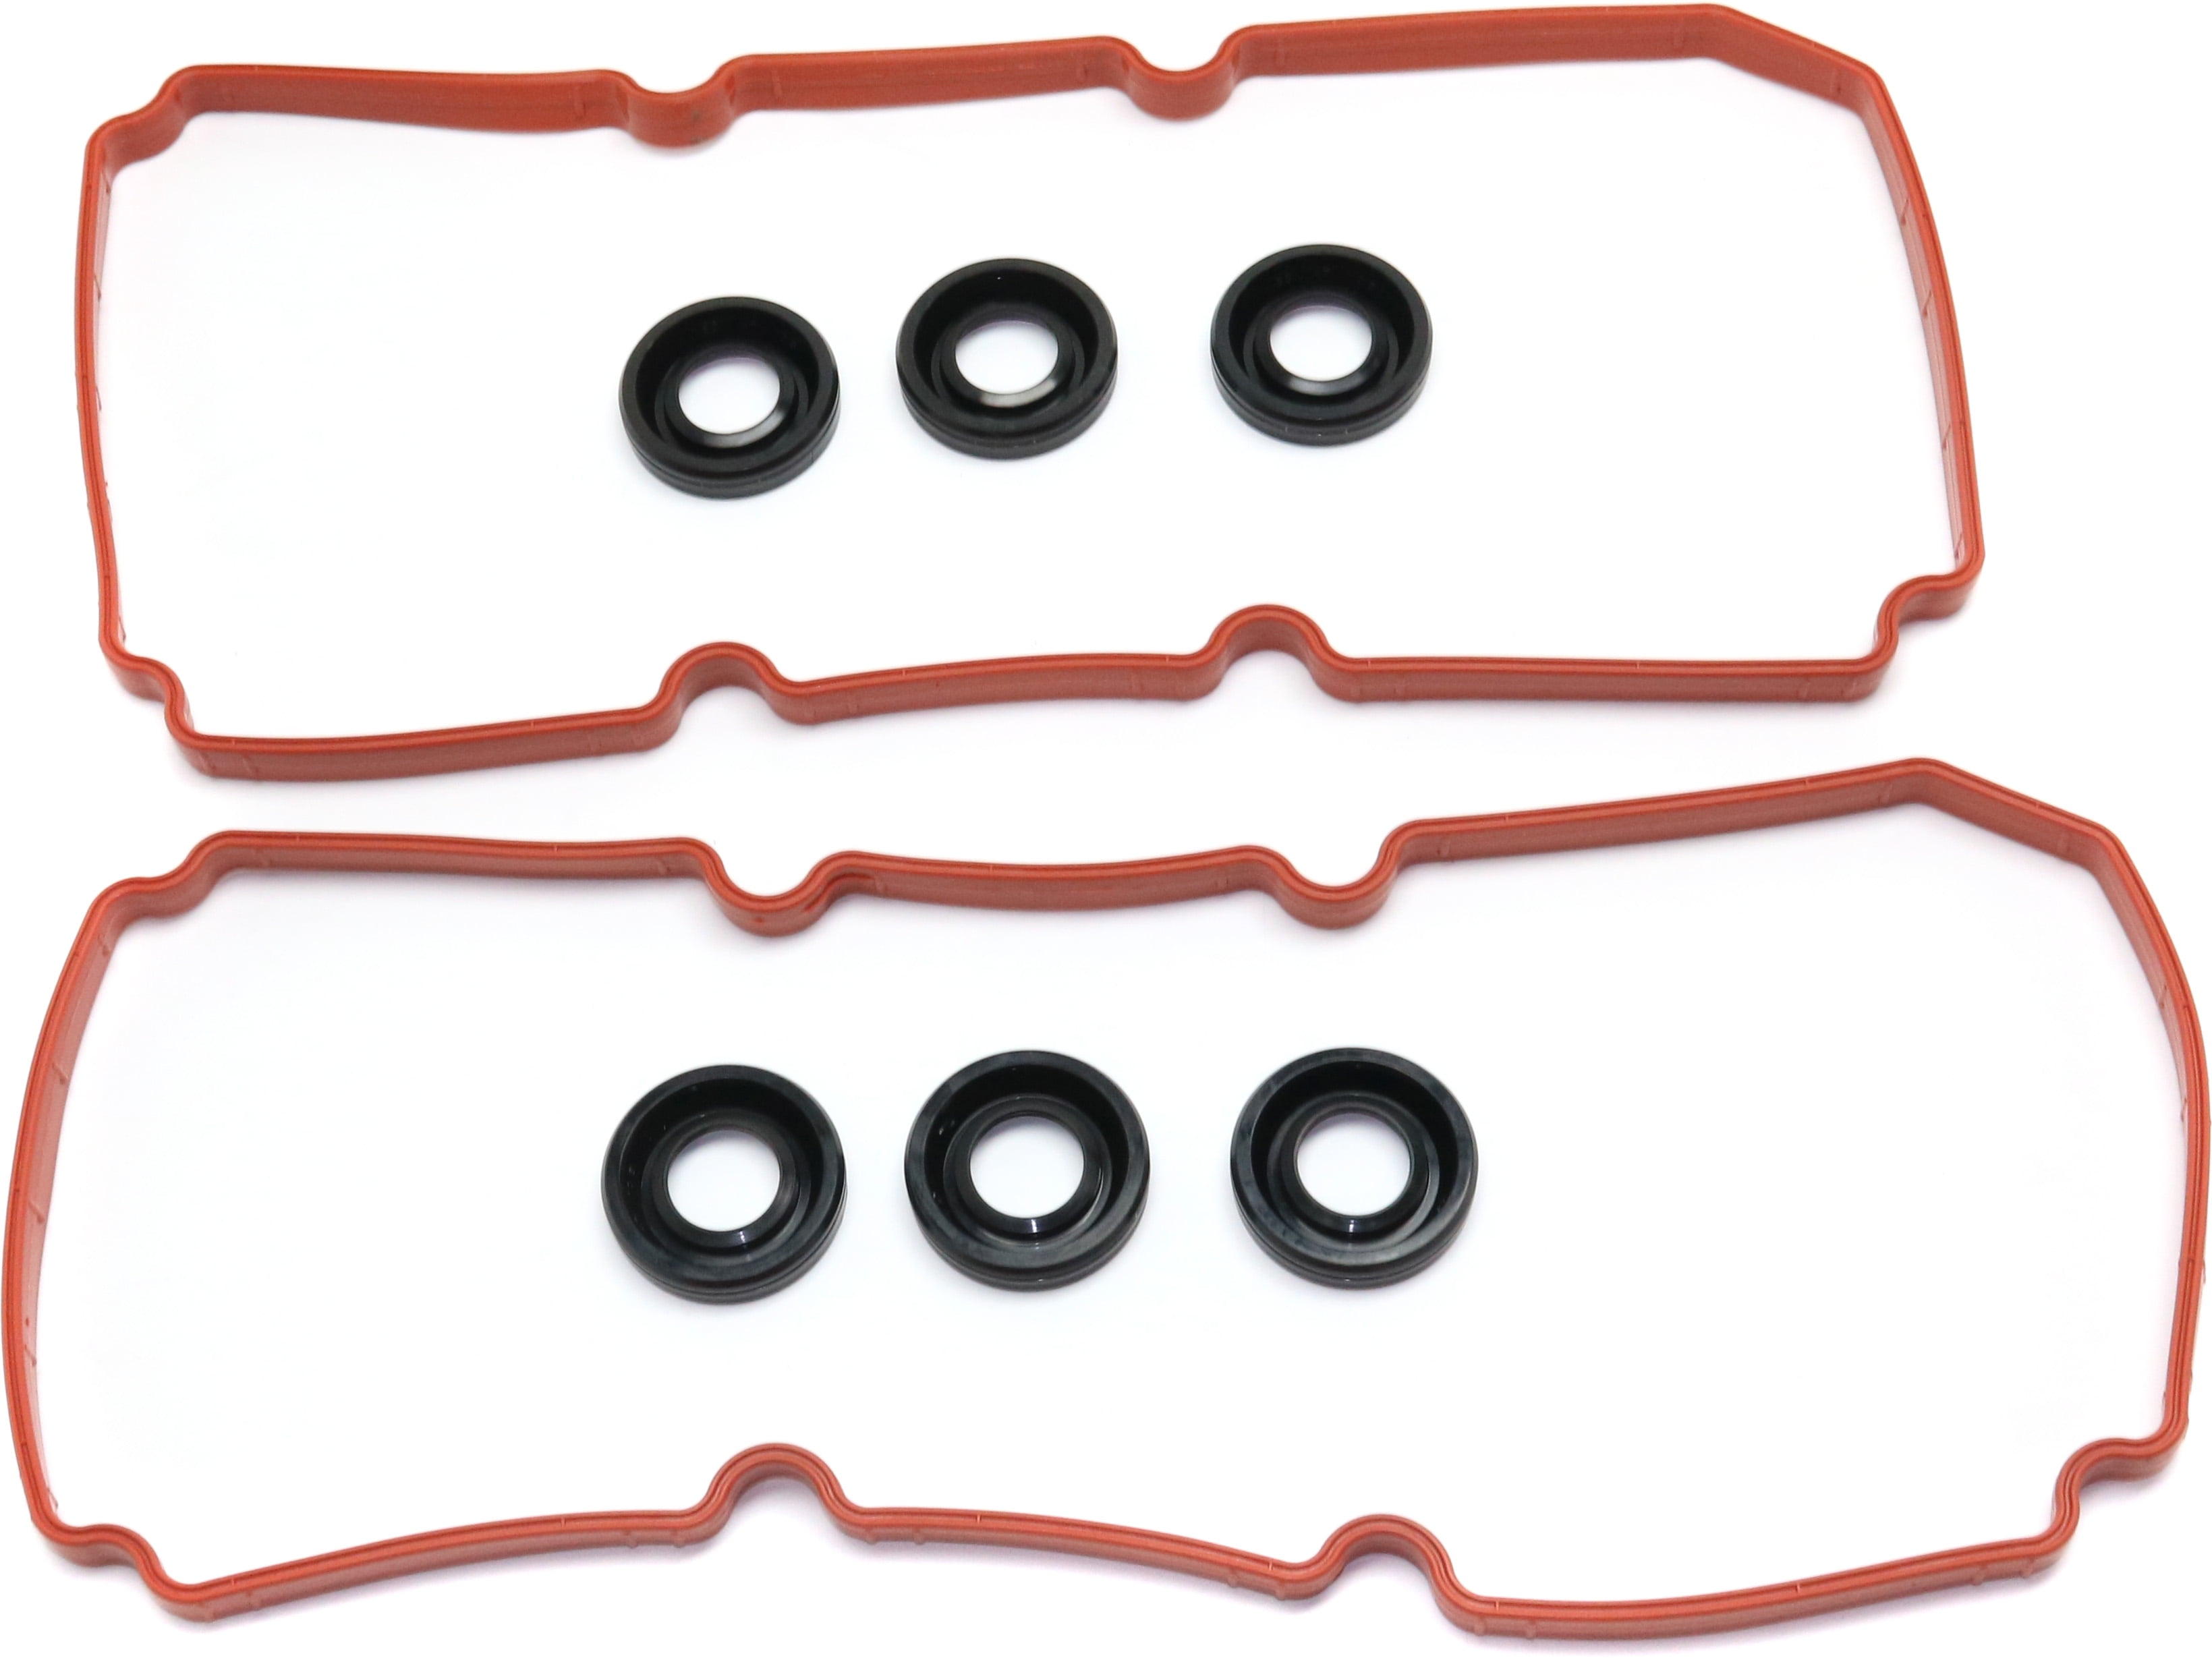 Valve Cover Gasket Compatible with 2008-2010 Dodge Grand Caravan Chrysler  Town and Country 6Cyl 4.0L